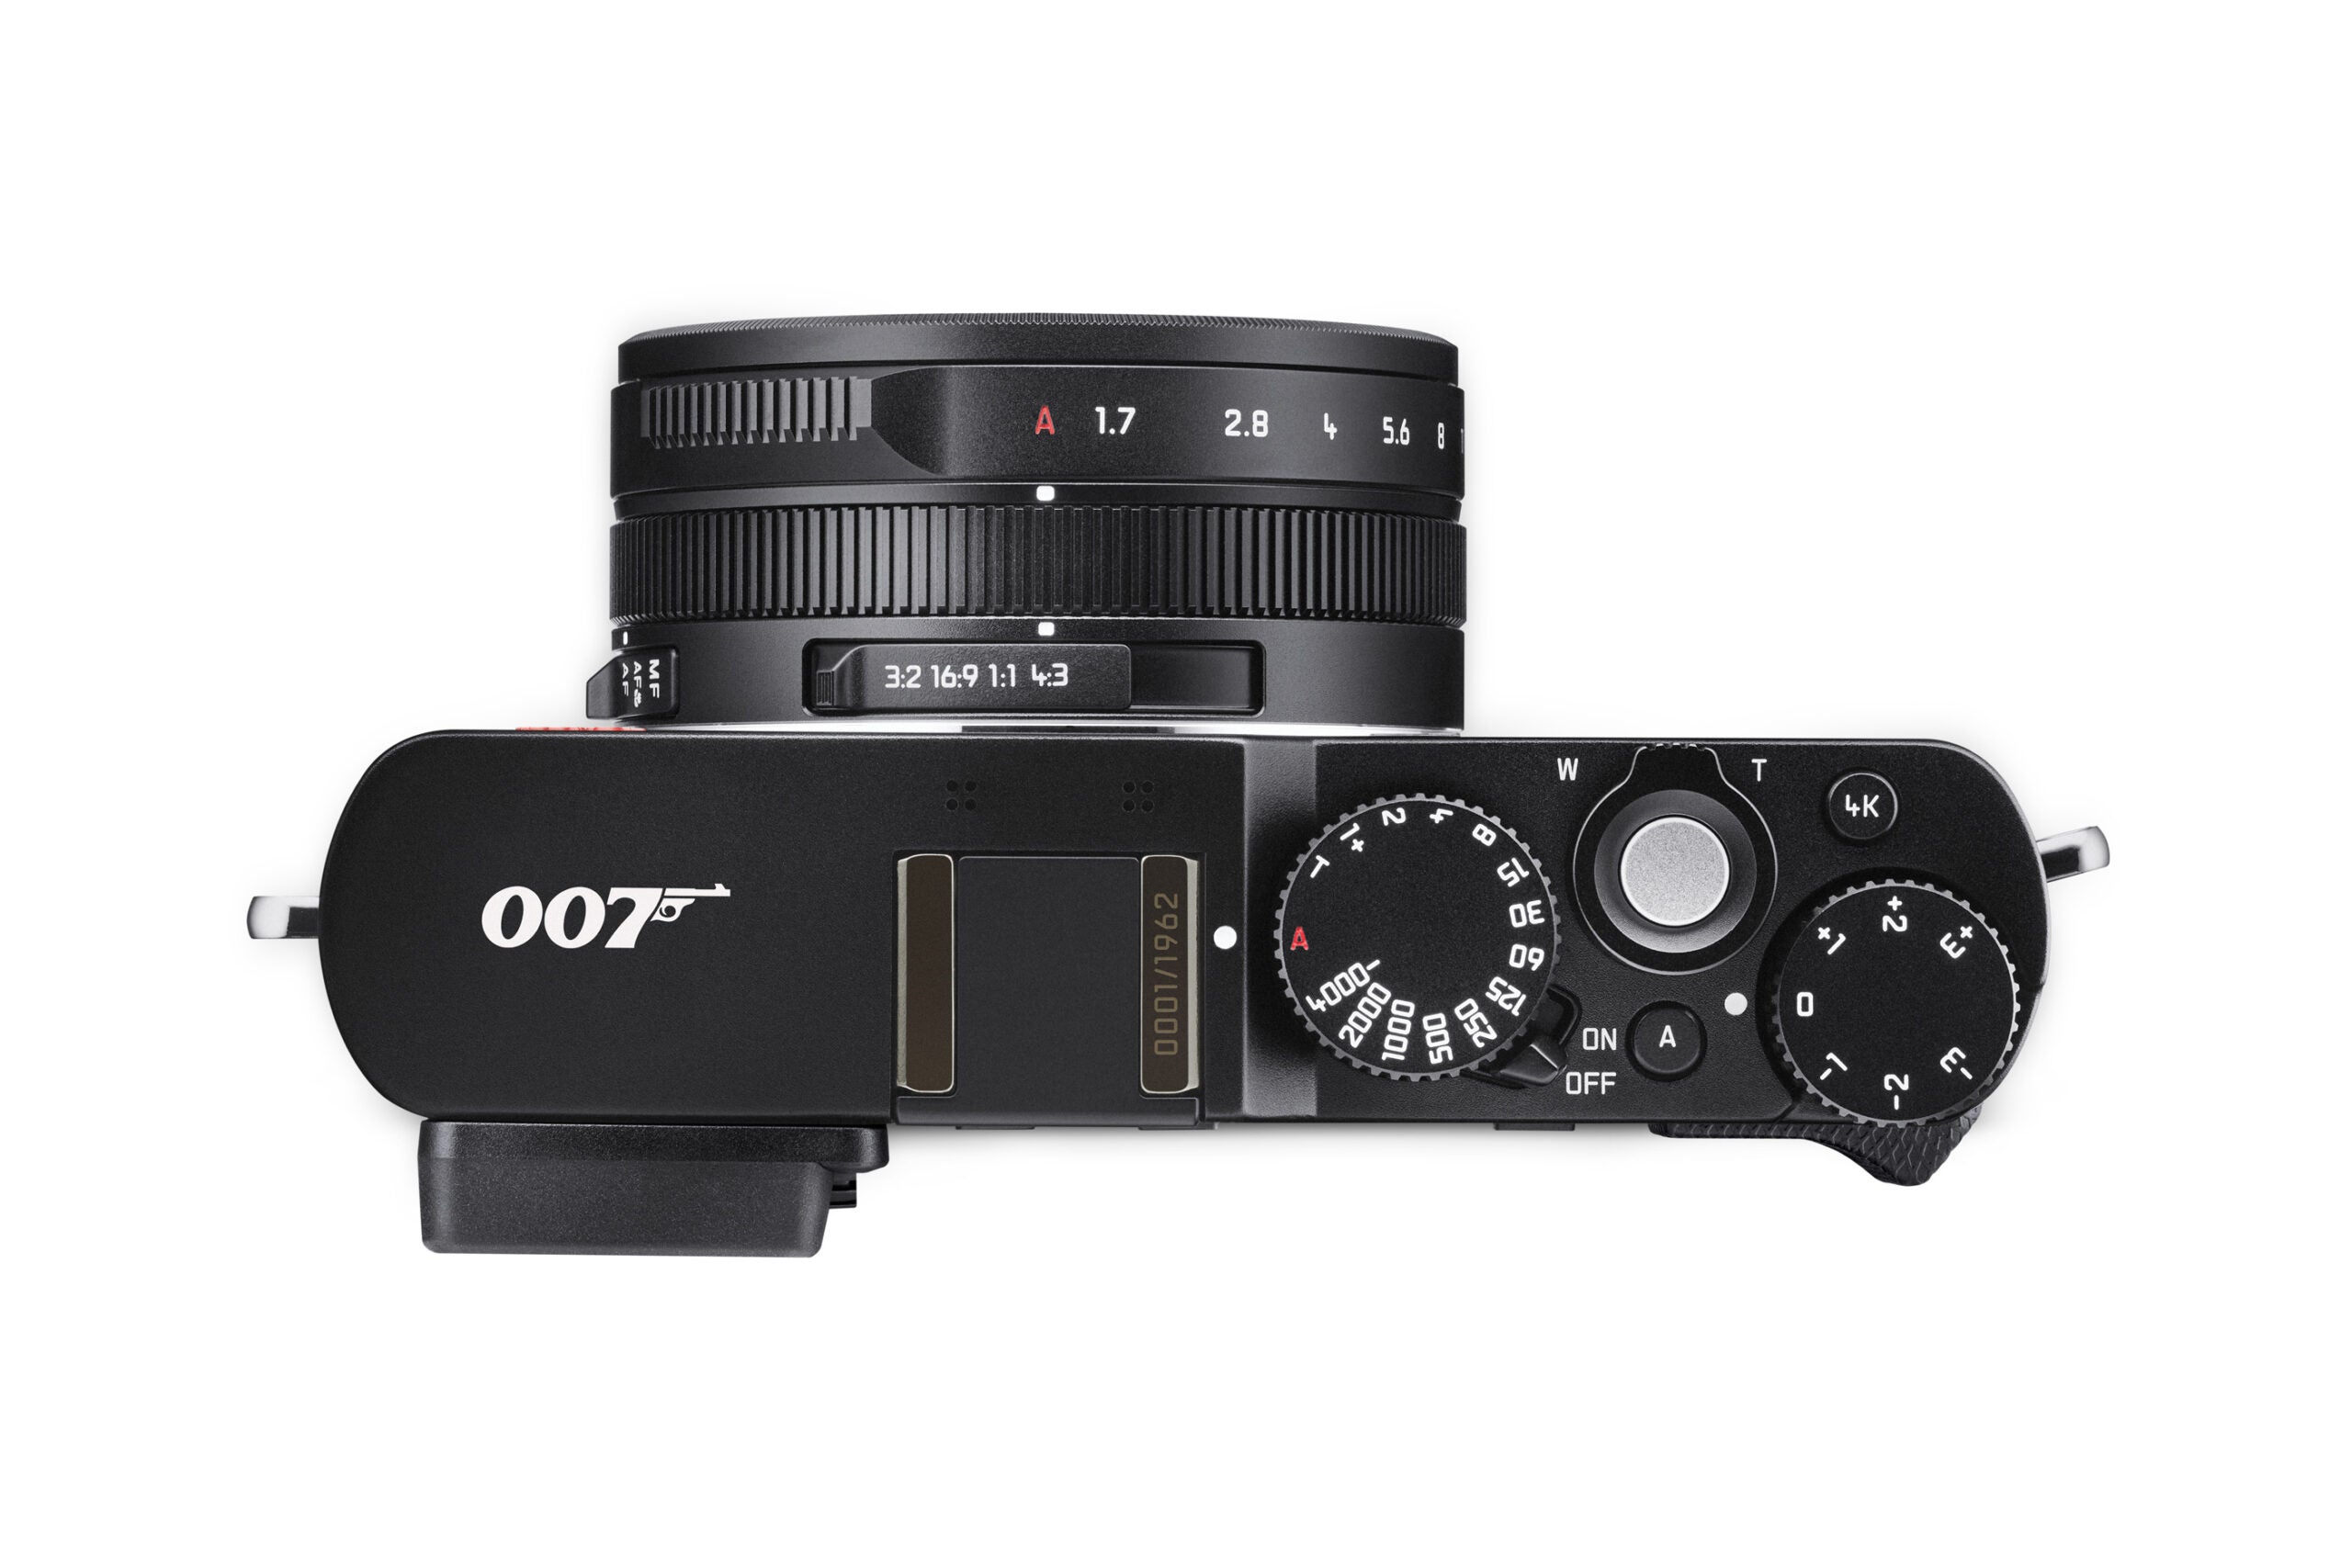 The top of the Leica D-Lux 7 007 Edition camera with Bond logo